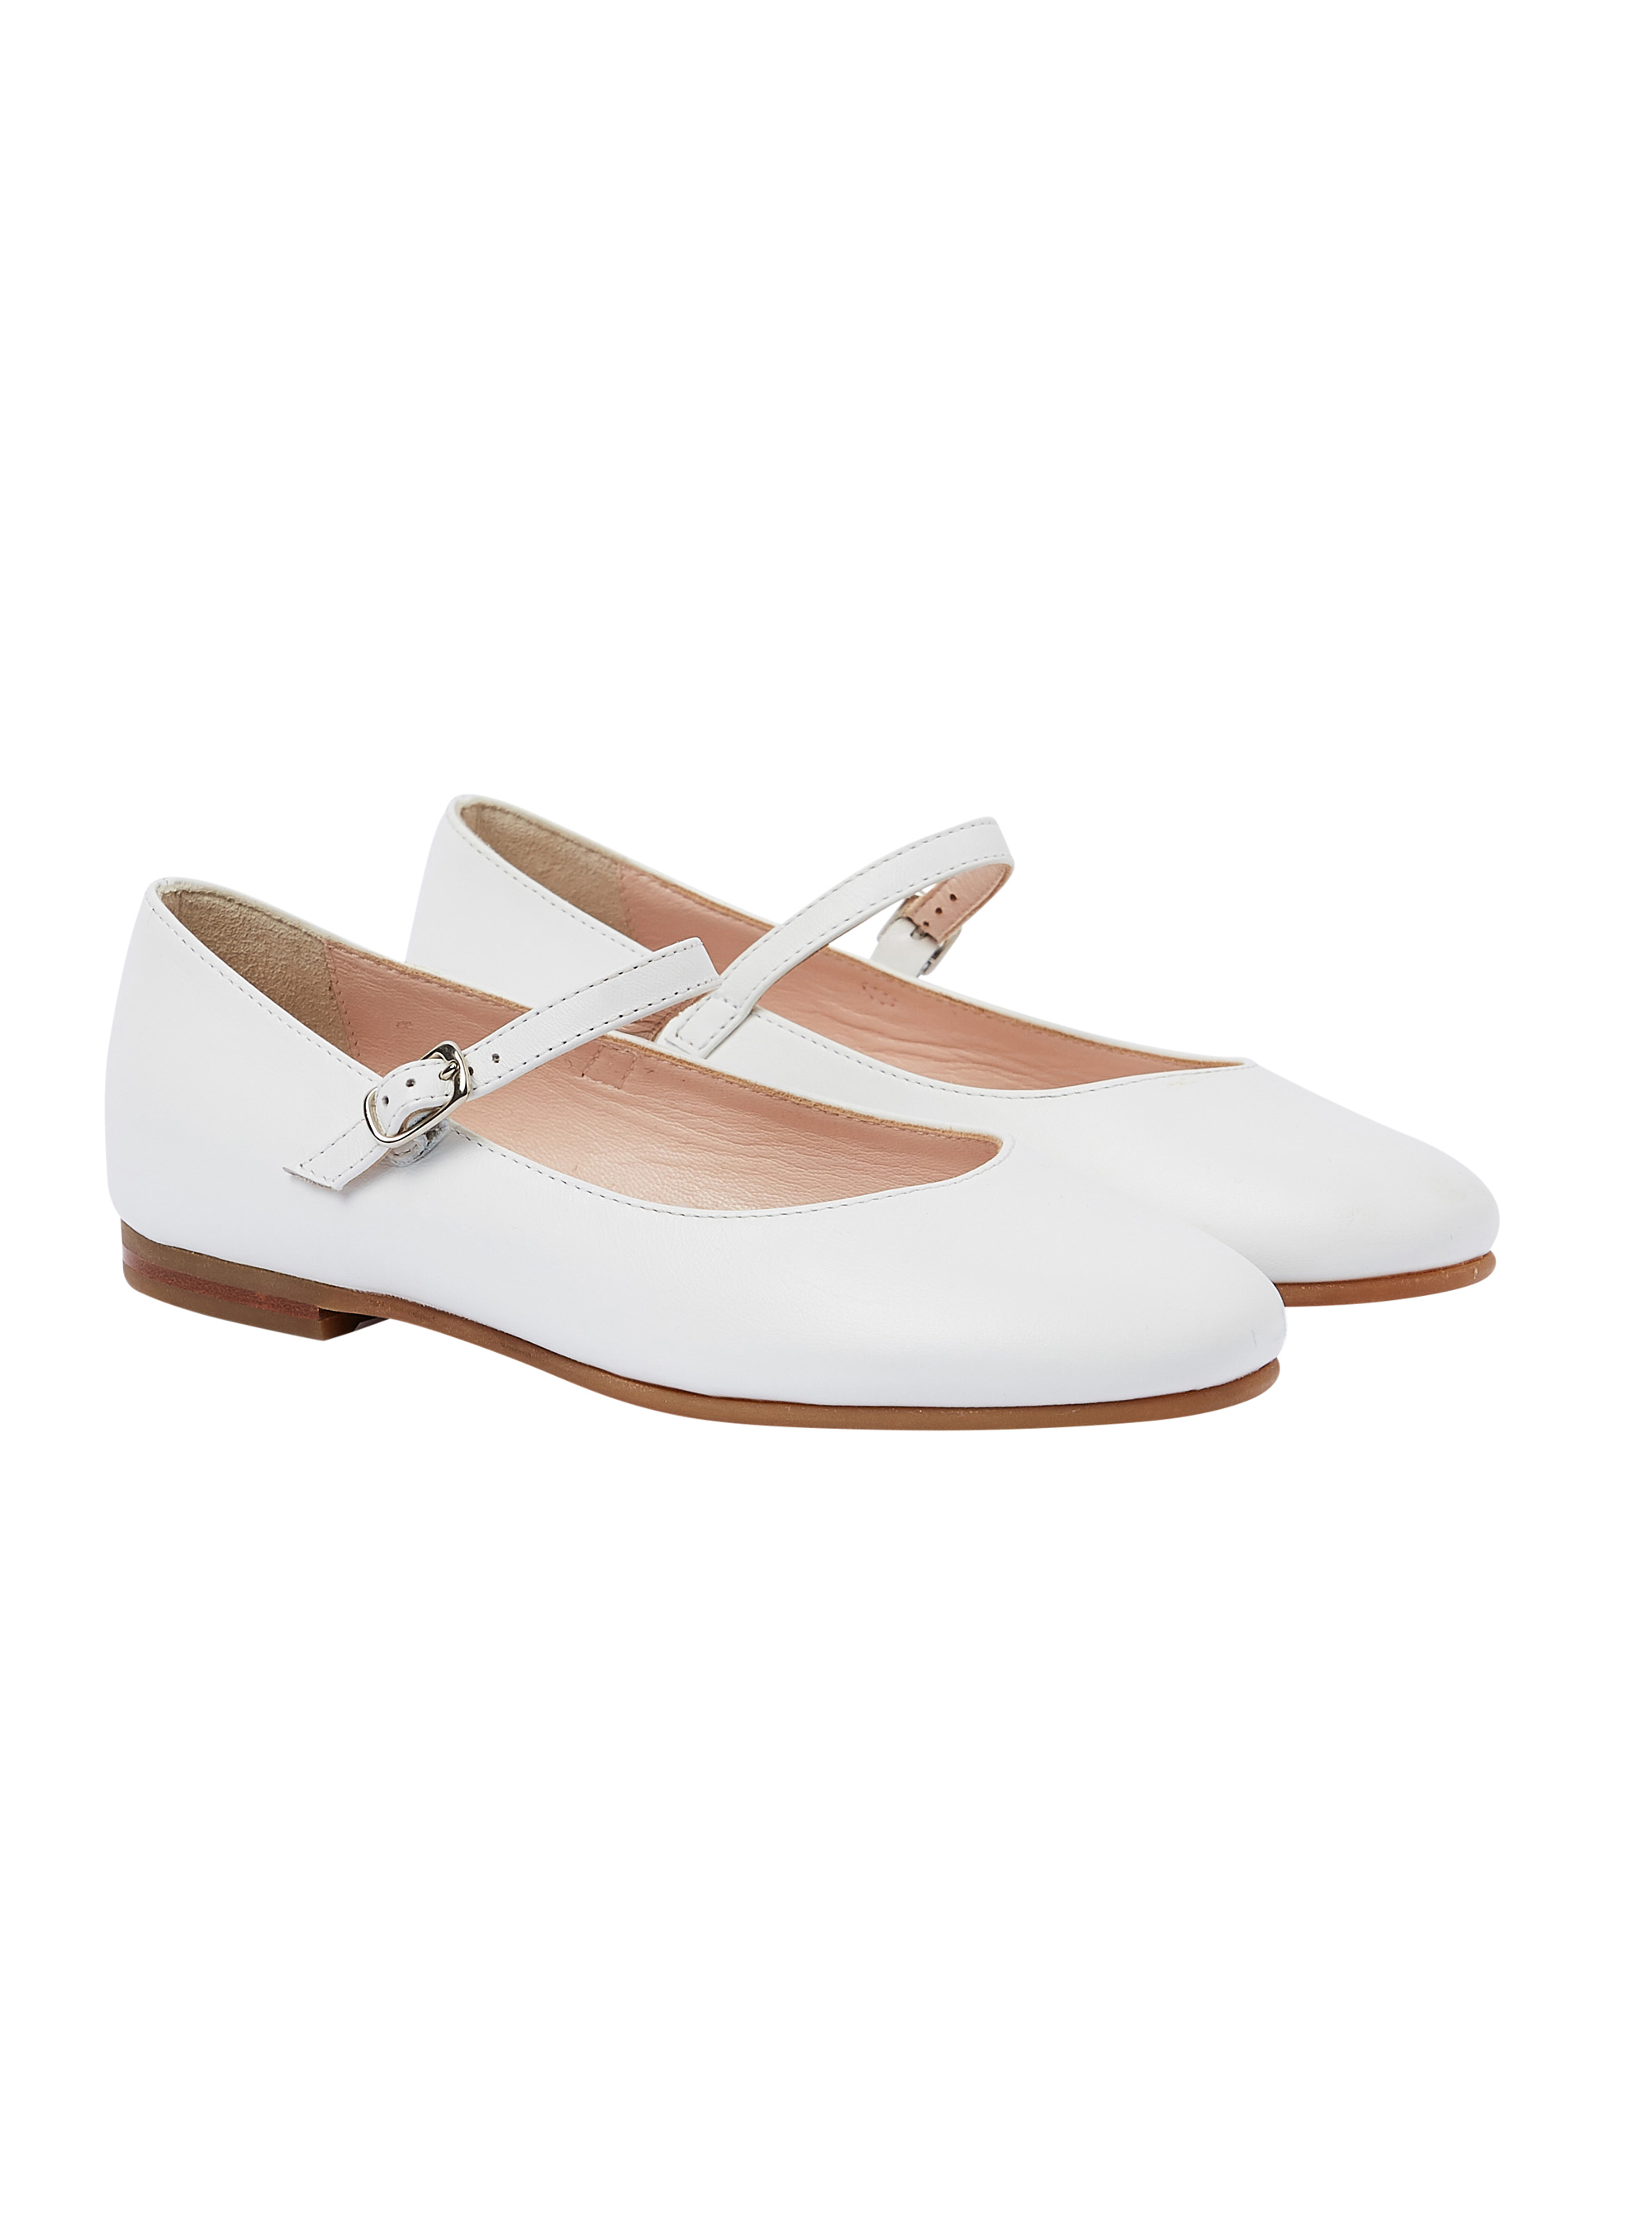 White leather flat shoes - Shoes - Il Gufo